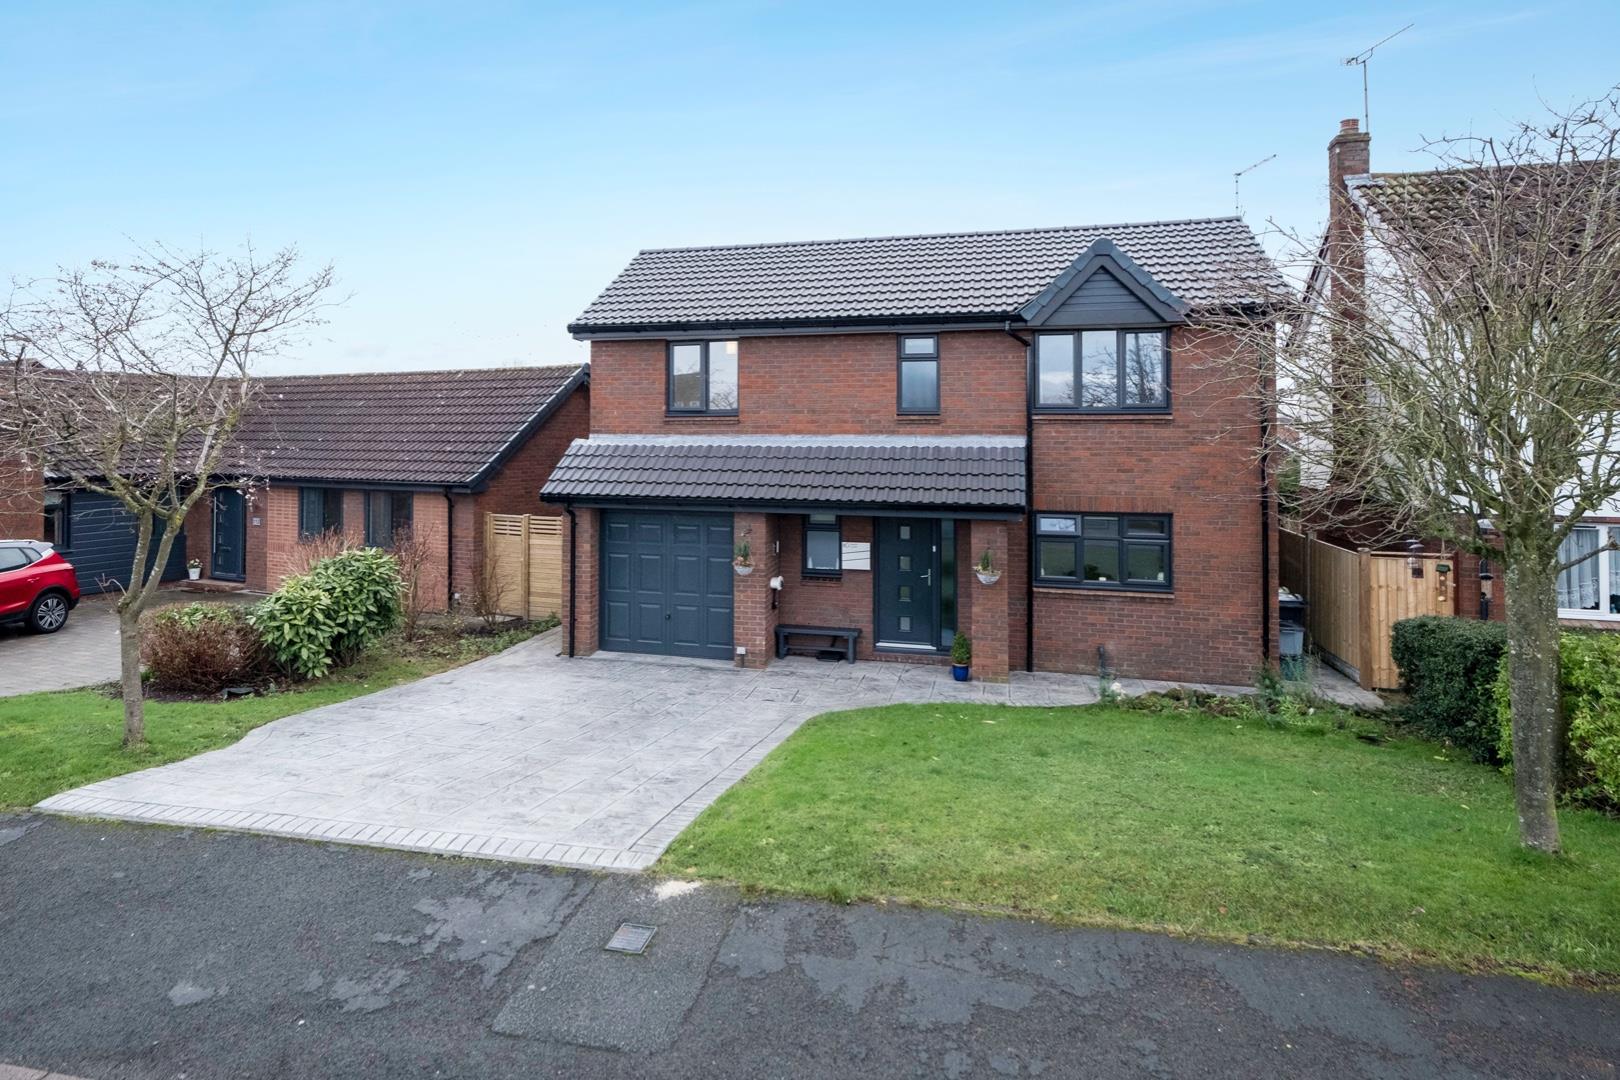 3 bedroom  Detached House for Sale in Great Boughton